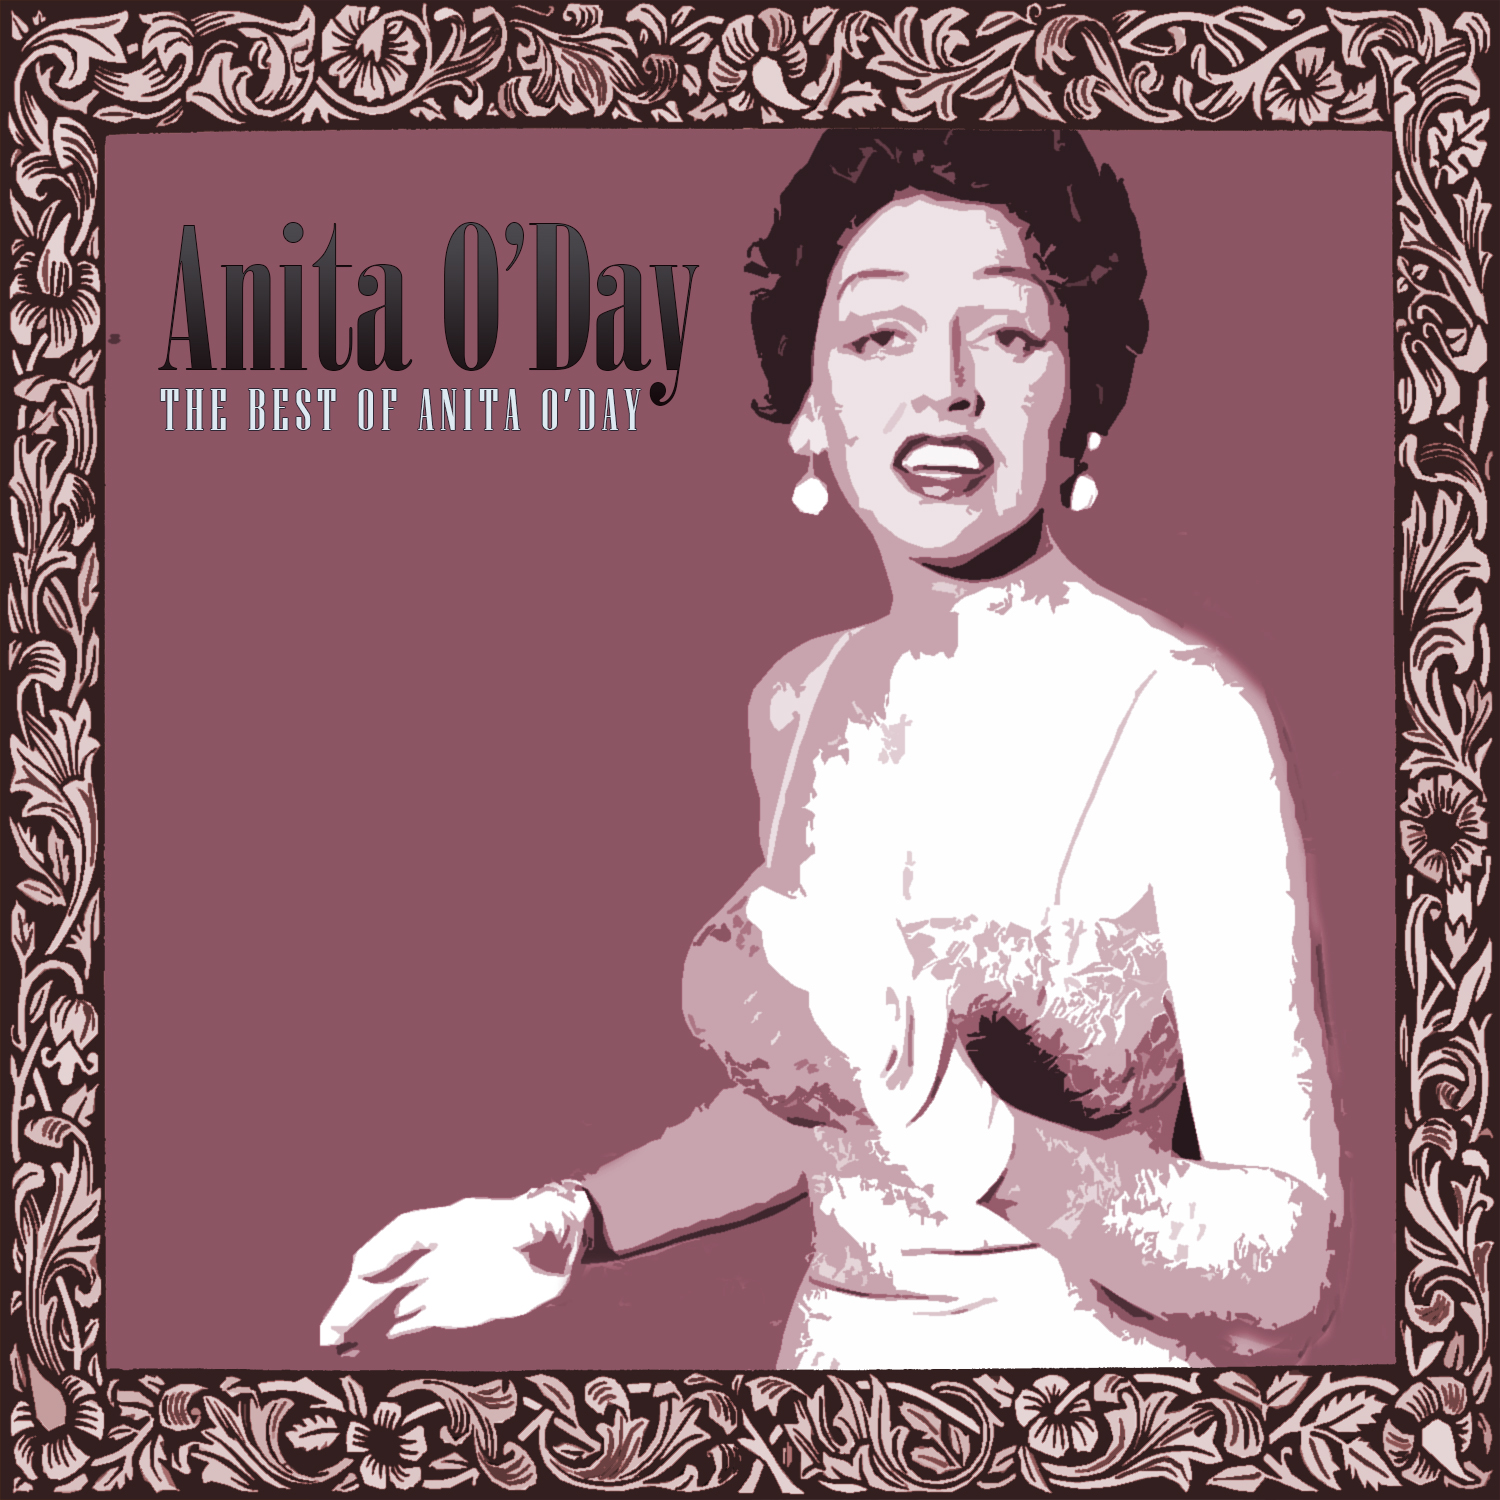 The Best of Anita O'Day by Anita O'Day